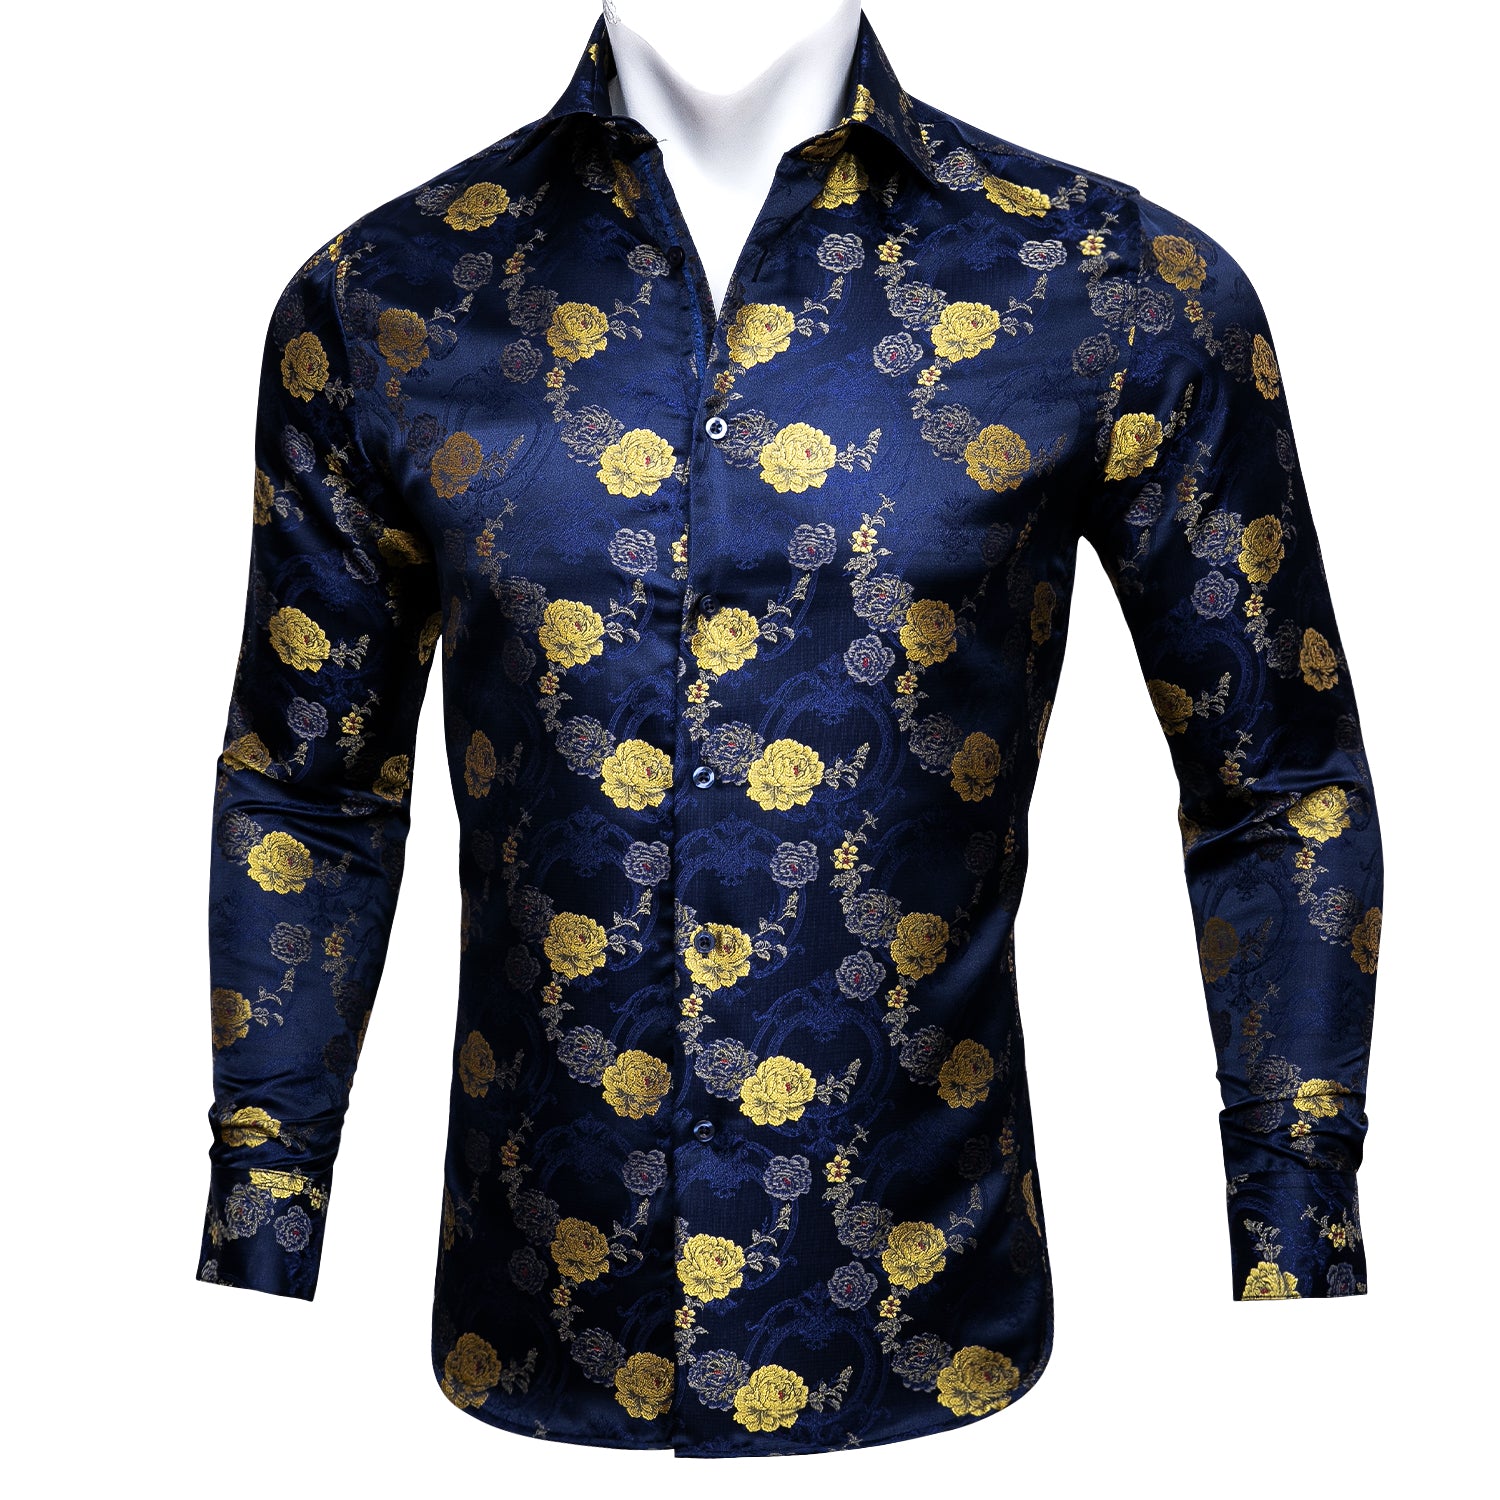 men's solid color dress shirts floral pattern long sleeves shirts